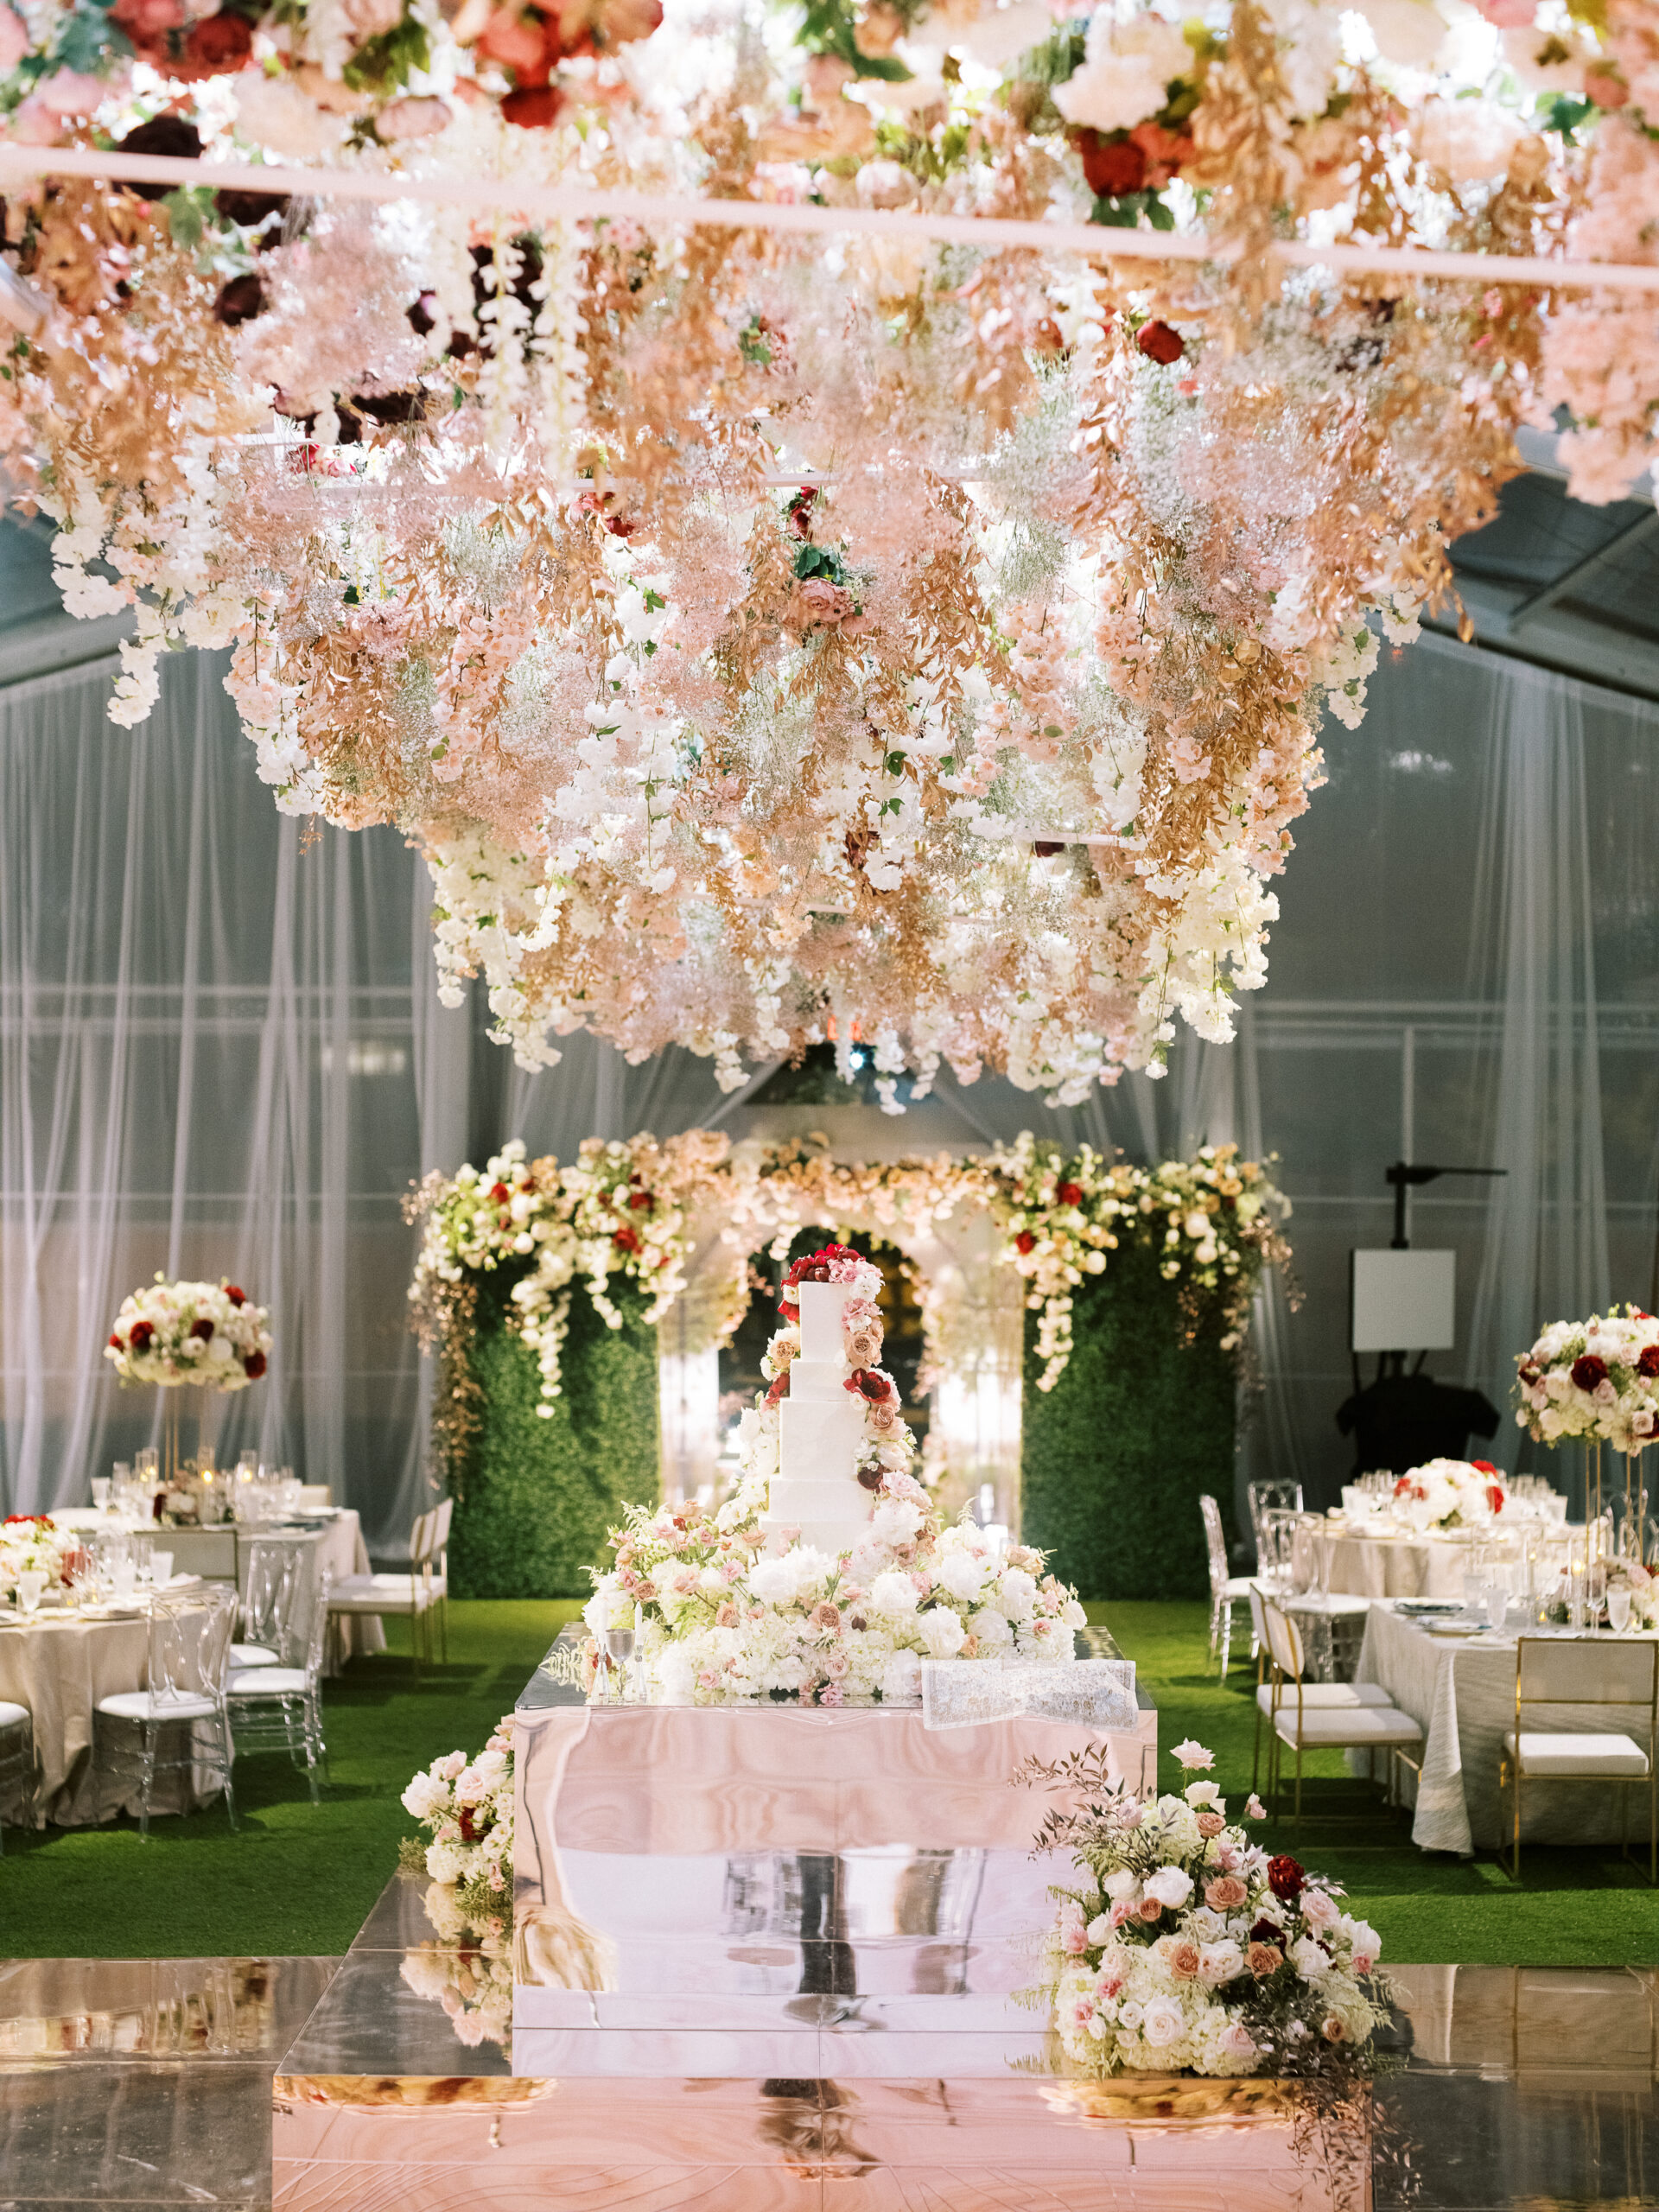 Large floral arrangement hunt from the ceiling of a clear tent, hanging over a white wedding cake covered in roses